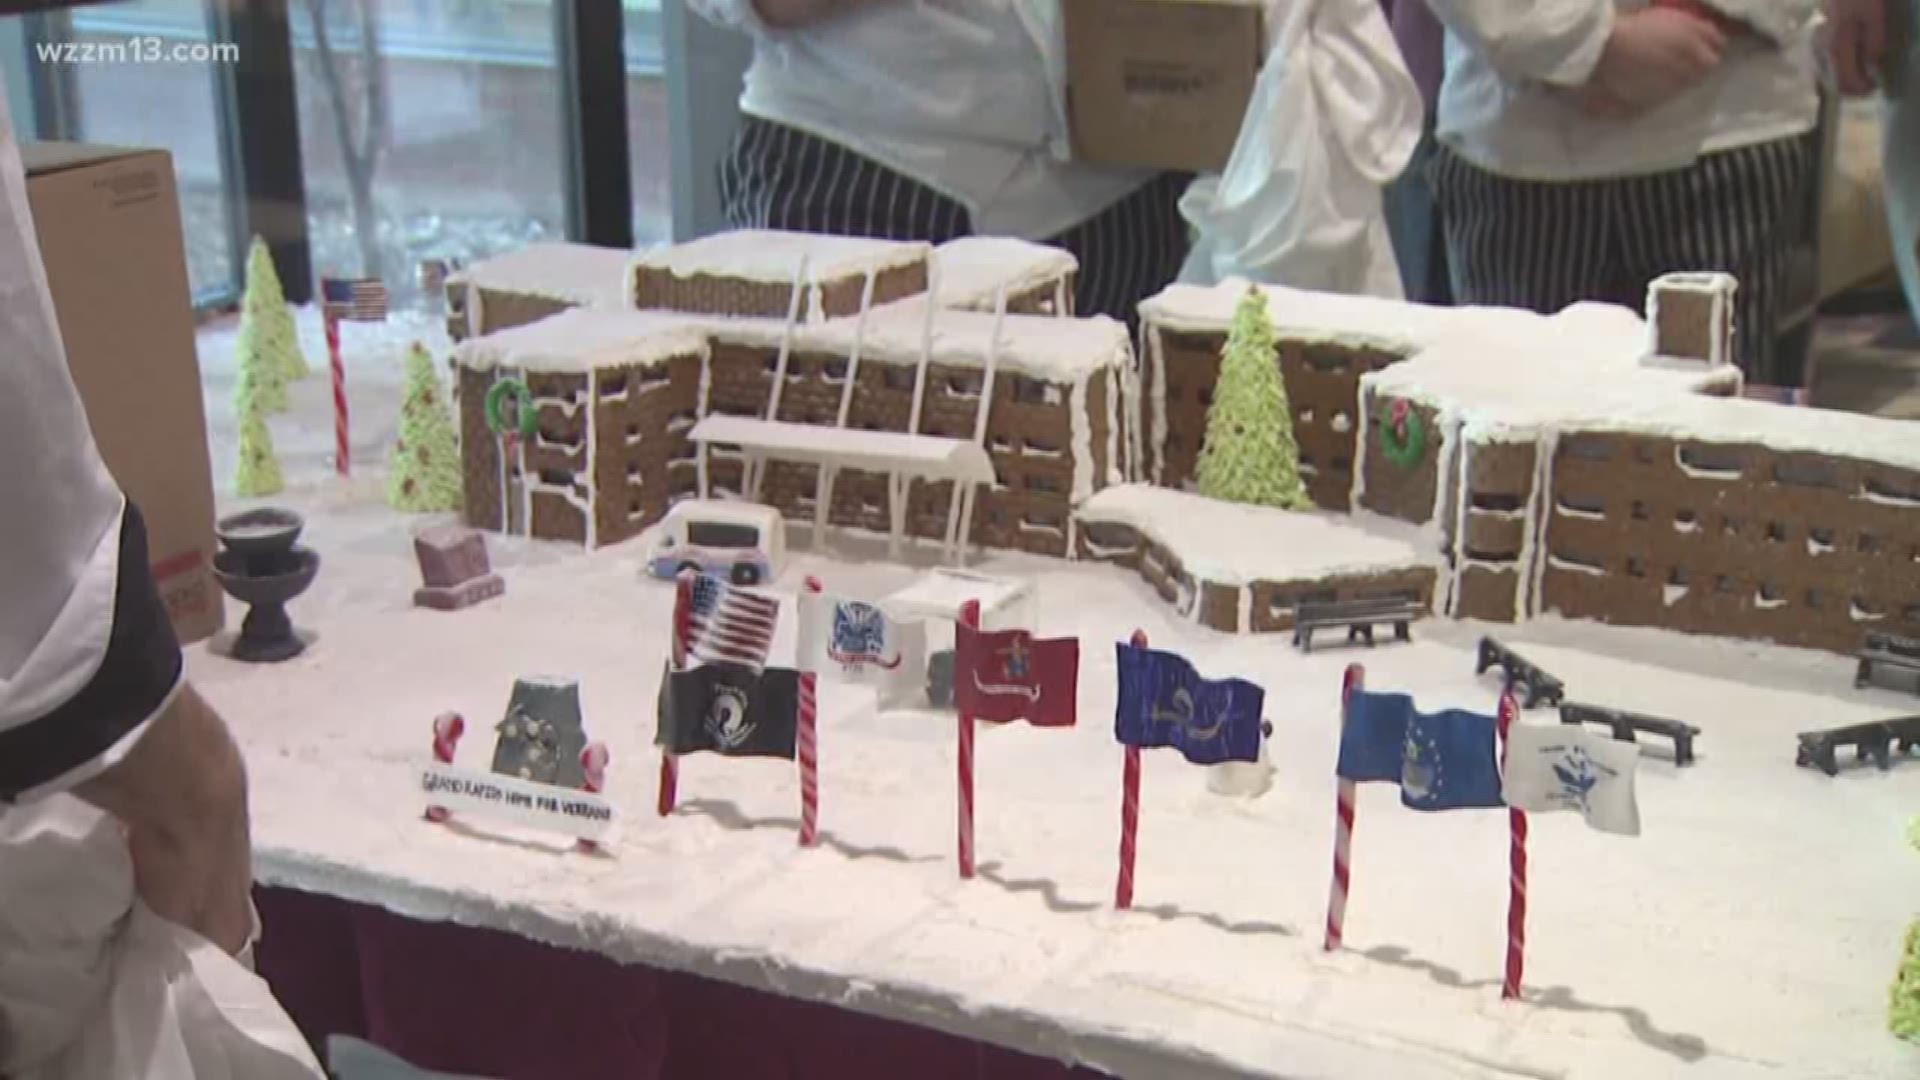 Grand Rapids Home for Veterans get a sweet treat this holiday season